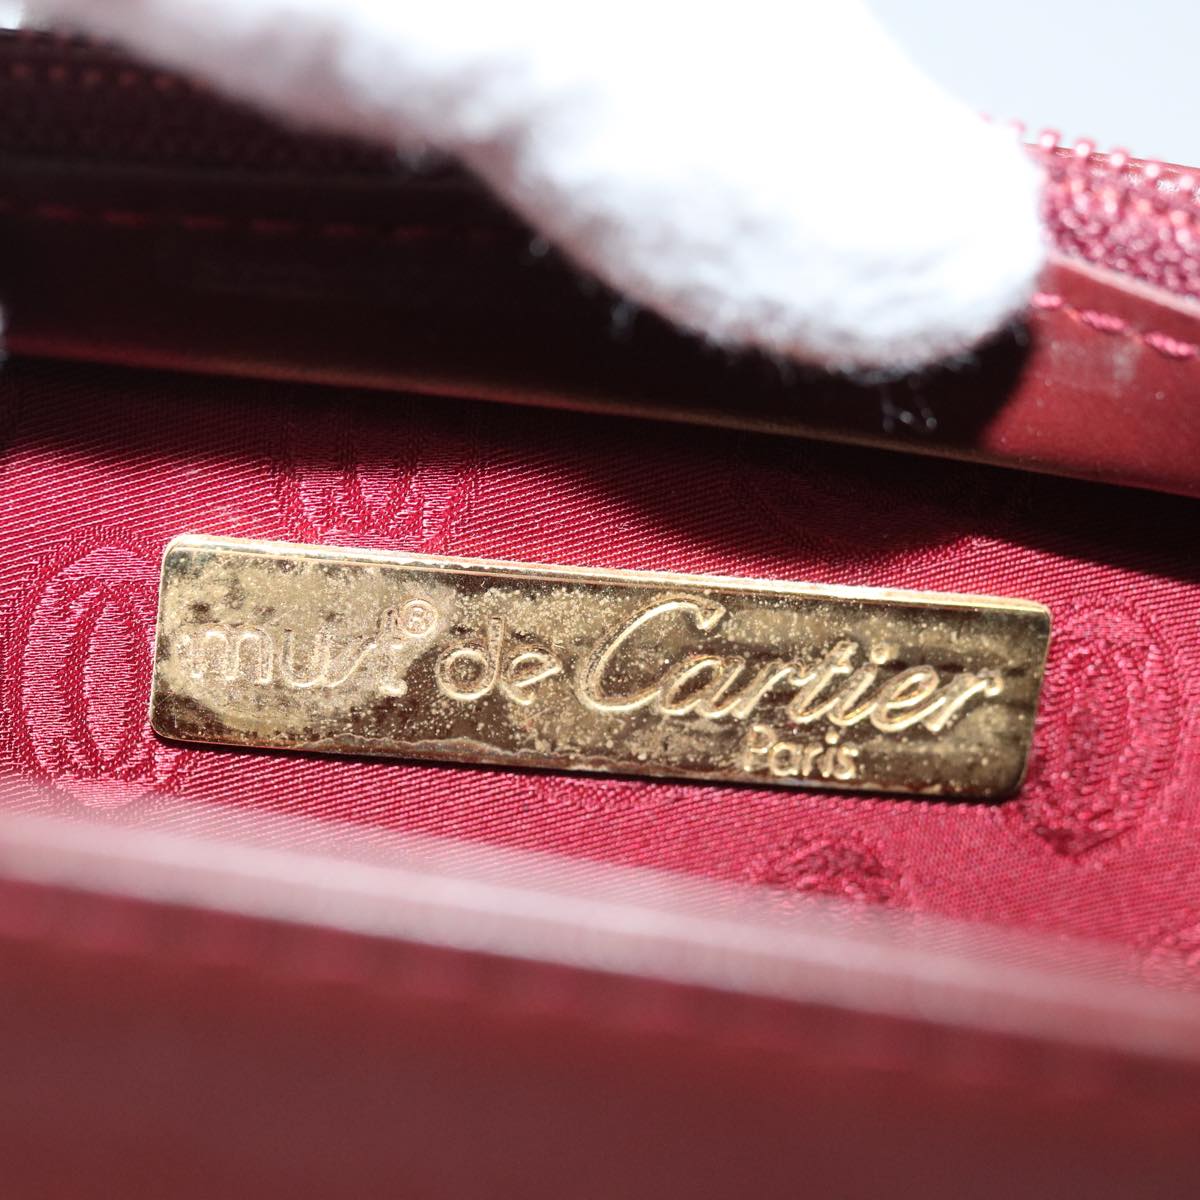 CARTIER Clutch Bag Leather Wine Red Auth 68226